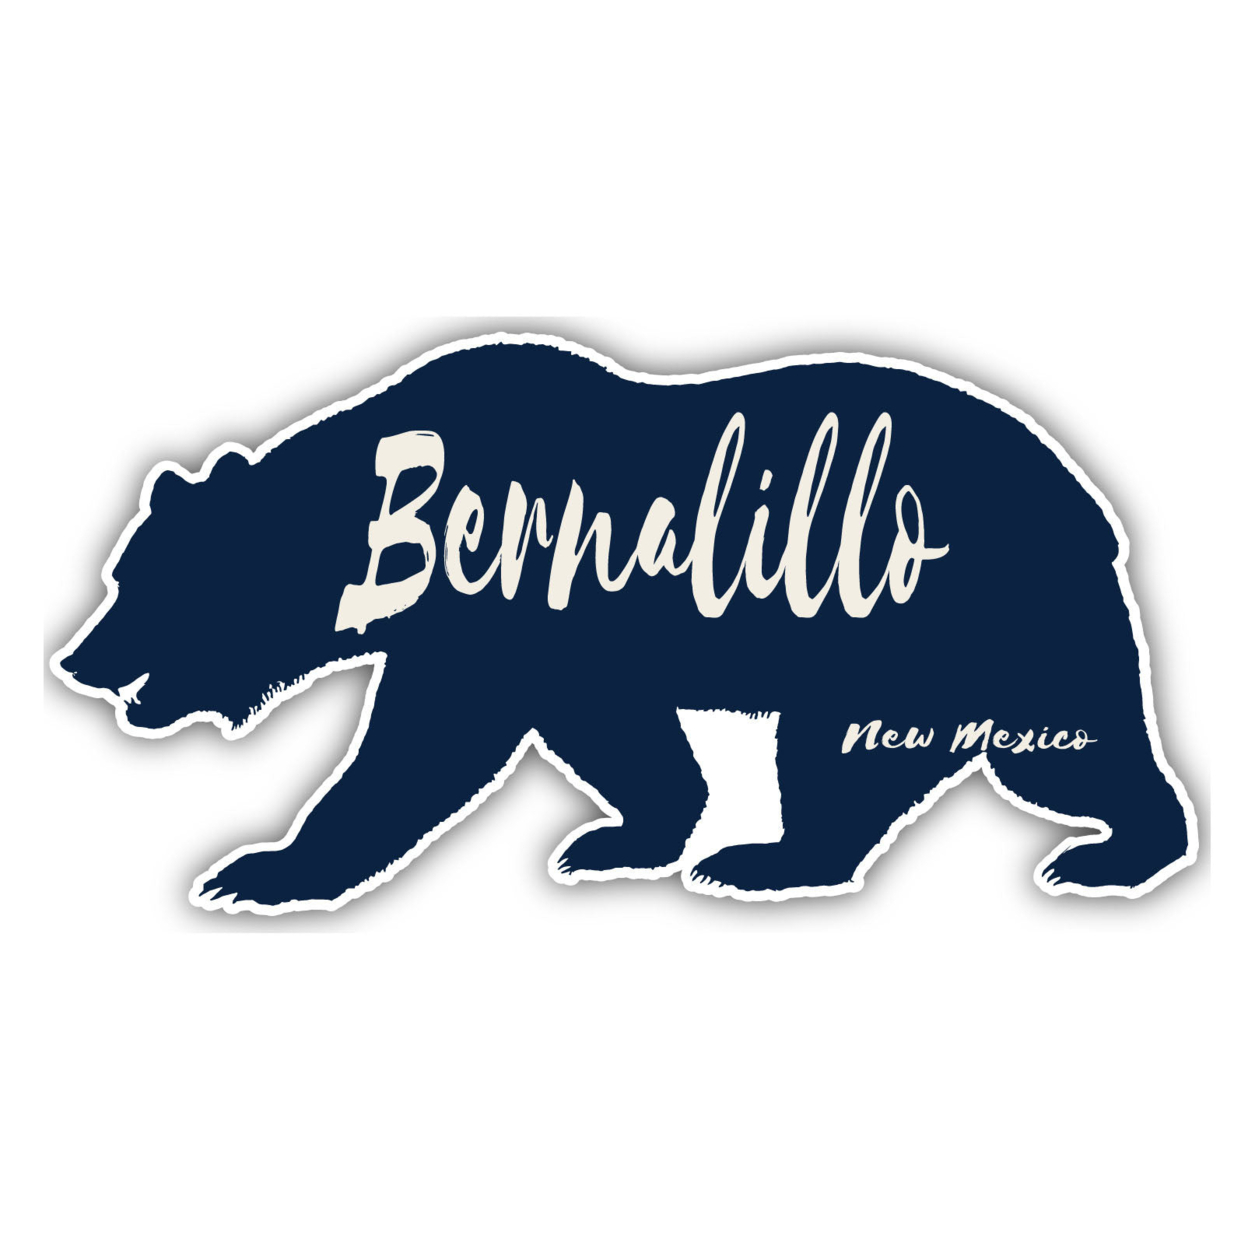 Bernalillo New Mexico Souvenir Decorative Stickers (Choose Theme And Size) - 4-Pack, 2-Inch, Bear